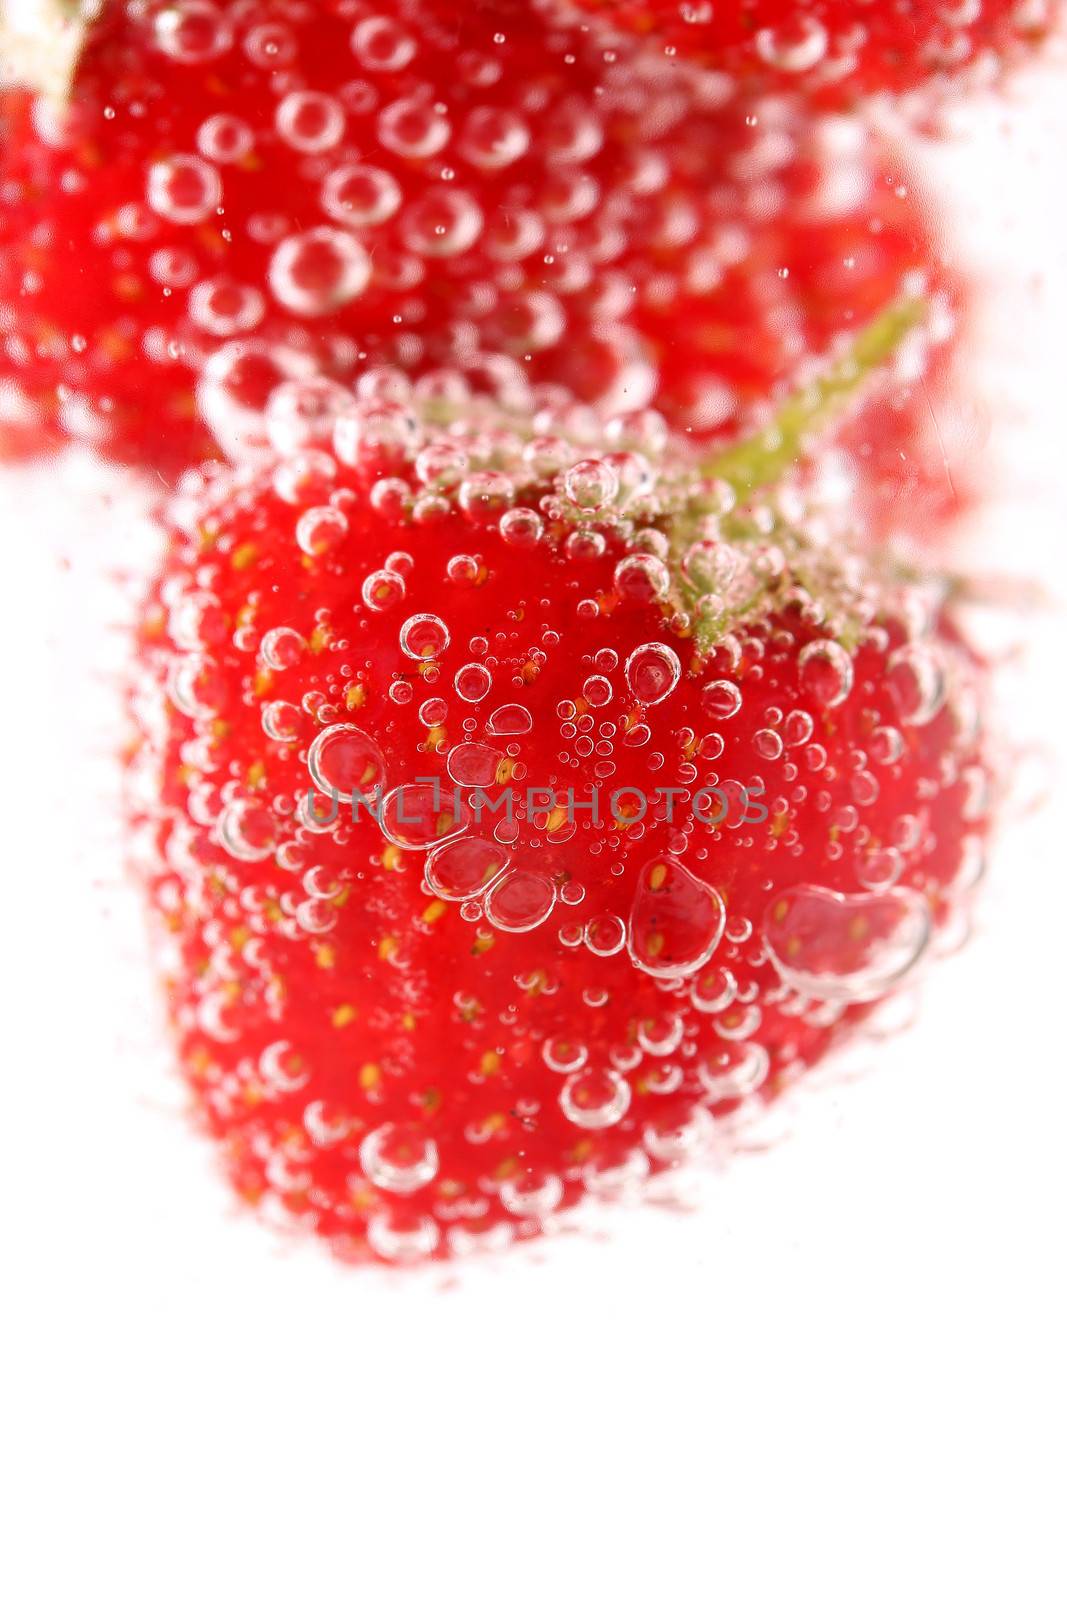 Sparkling wine (champagne) and strawberry by indigolotos